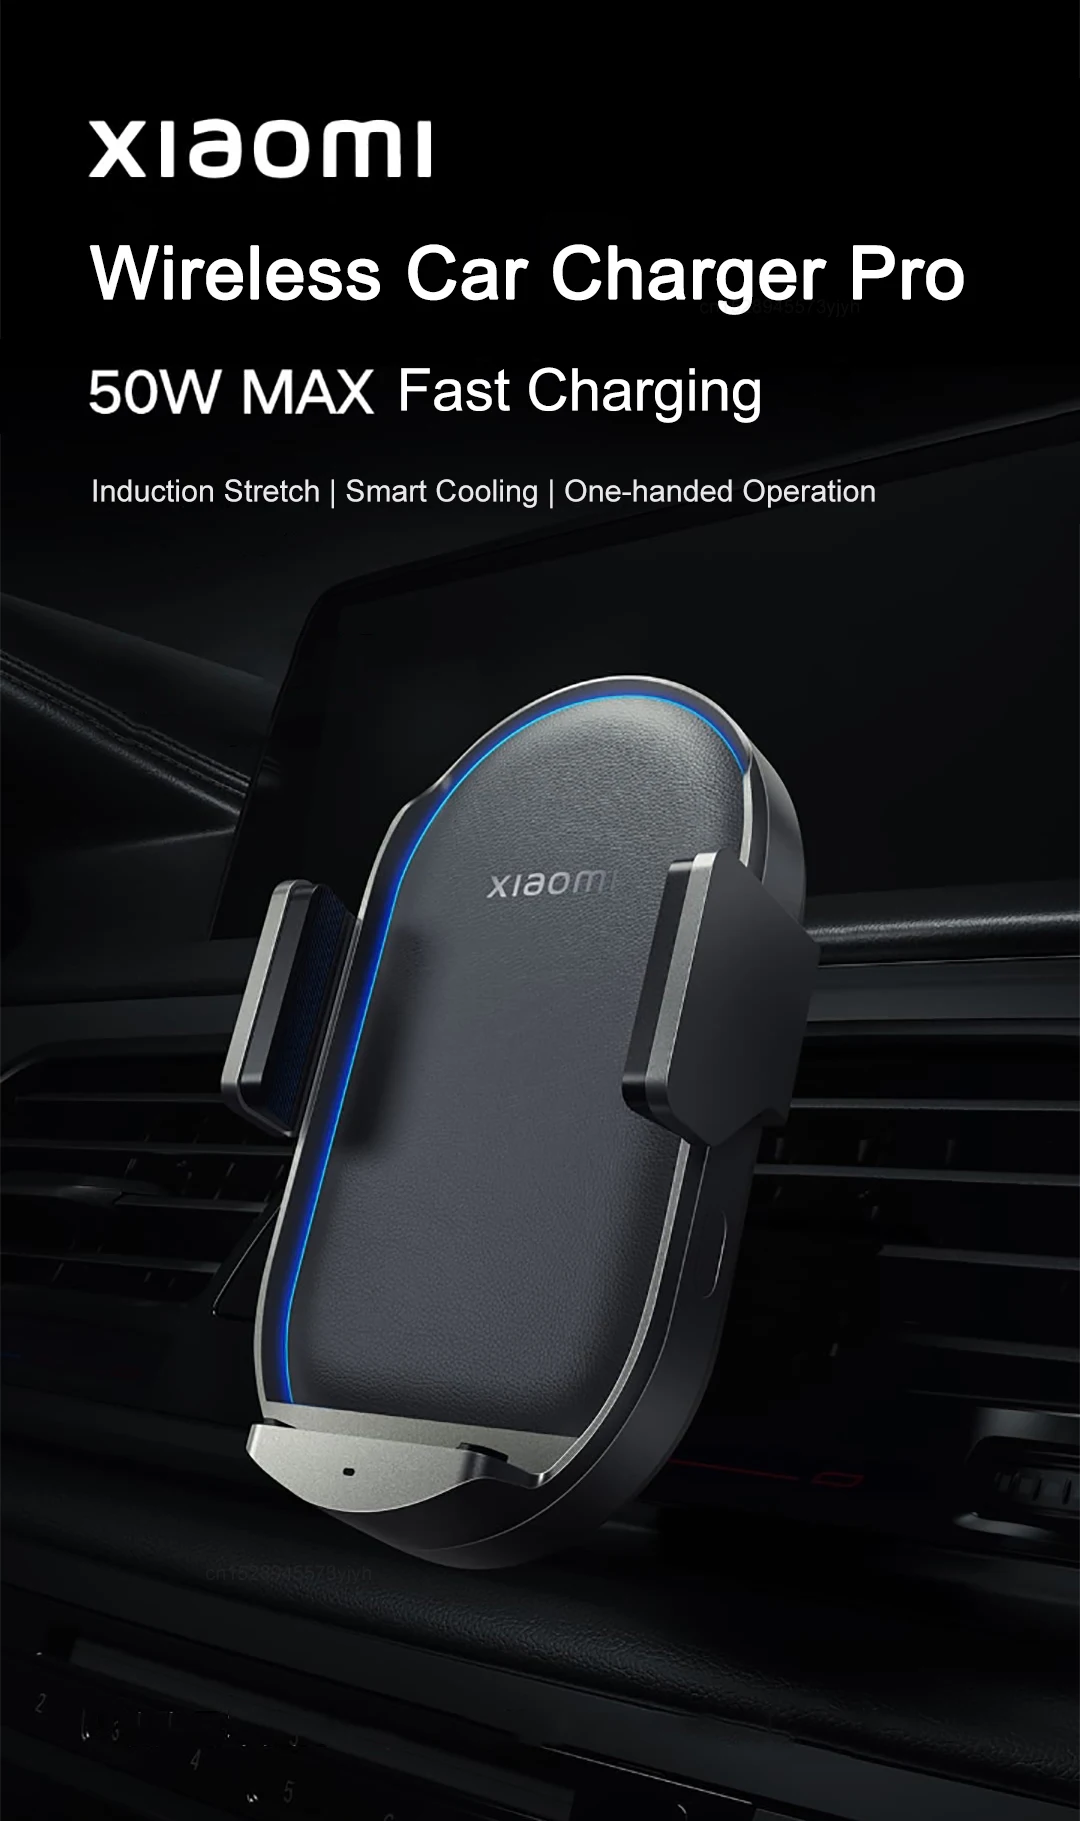 Mi Car Wireless Charger Pro 50W Max Wireless Flash Charging Automatic Sensor Stretching Smart Cooling Phone Holder Mount